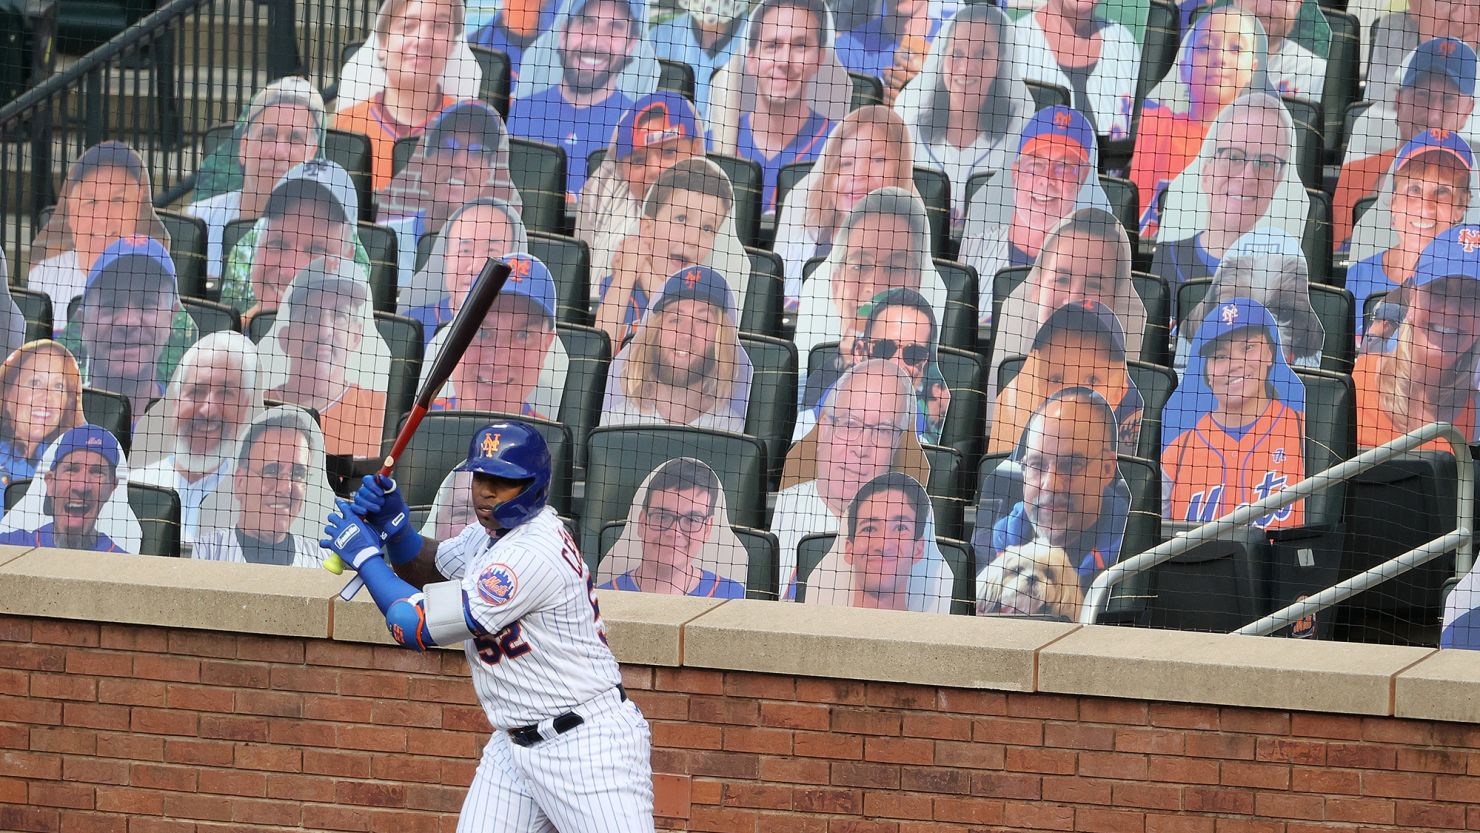  At least 11 teams are offering the chance for fans to purchase a cardboard cutout with their image on it. Here, Yoenis Cespedes of the New York Mets during a recent preseason home game.